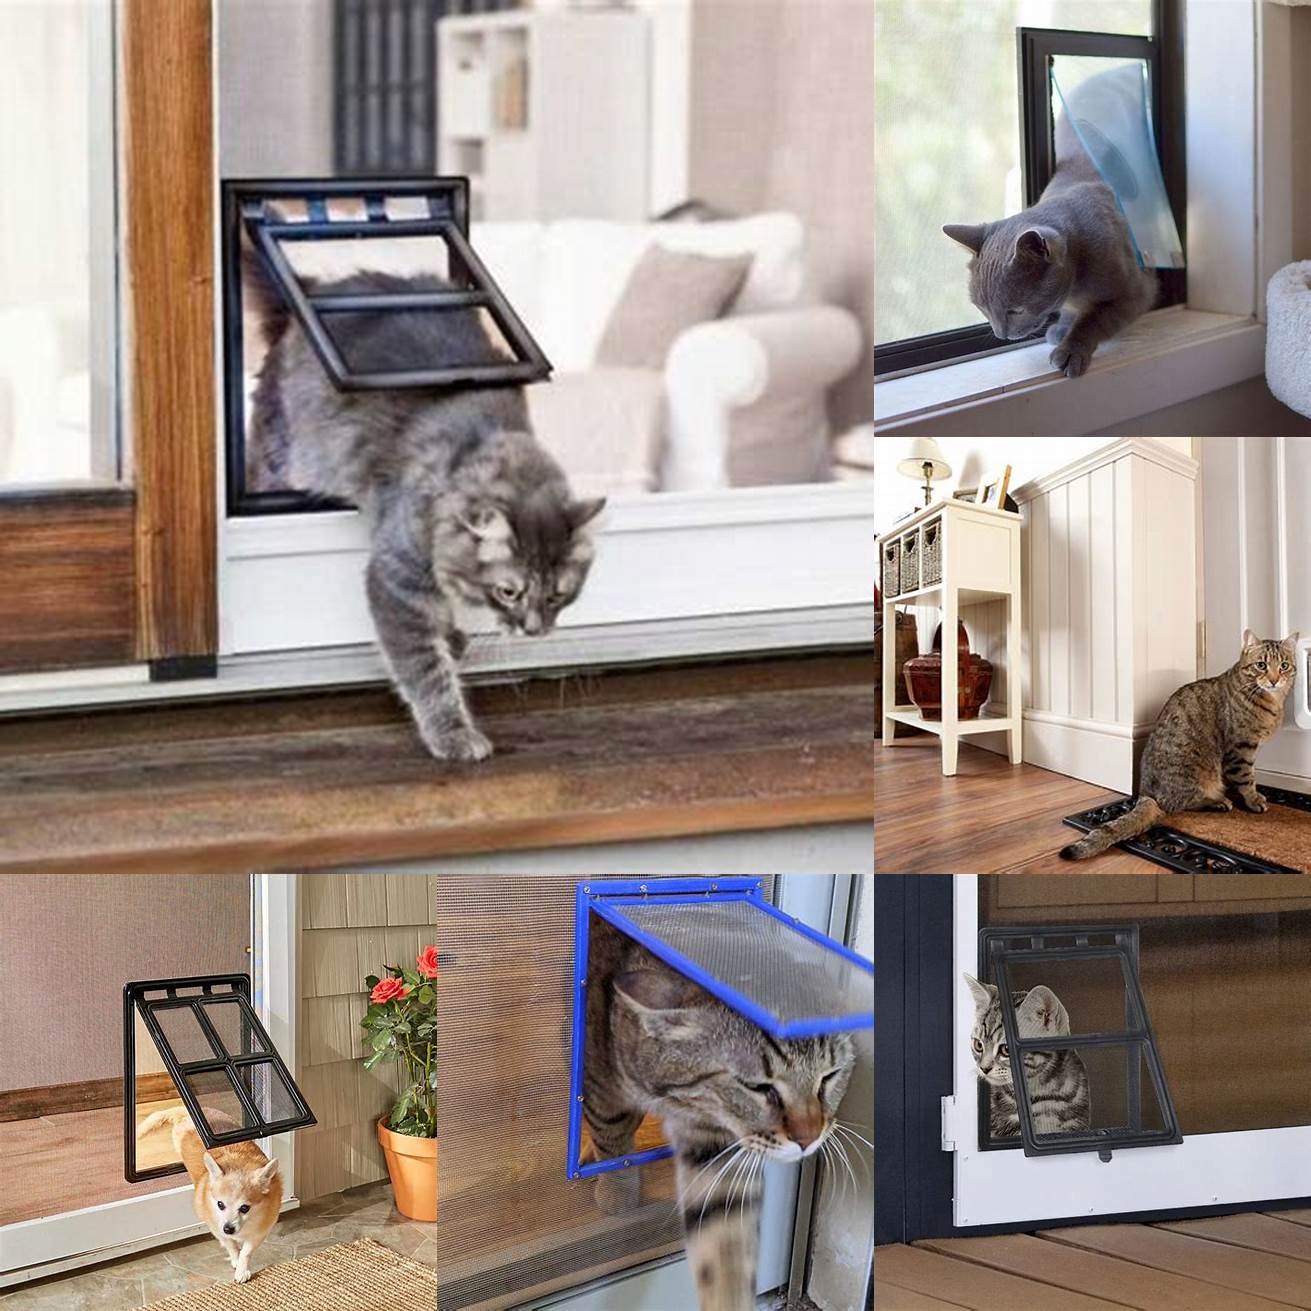 Close the cat door for screen at night or when youre not home to prevent unwanted visitors from entering your home